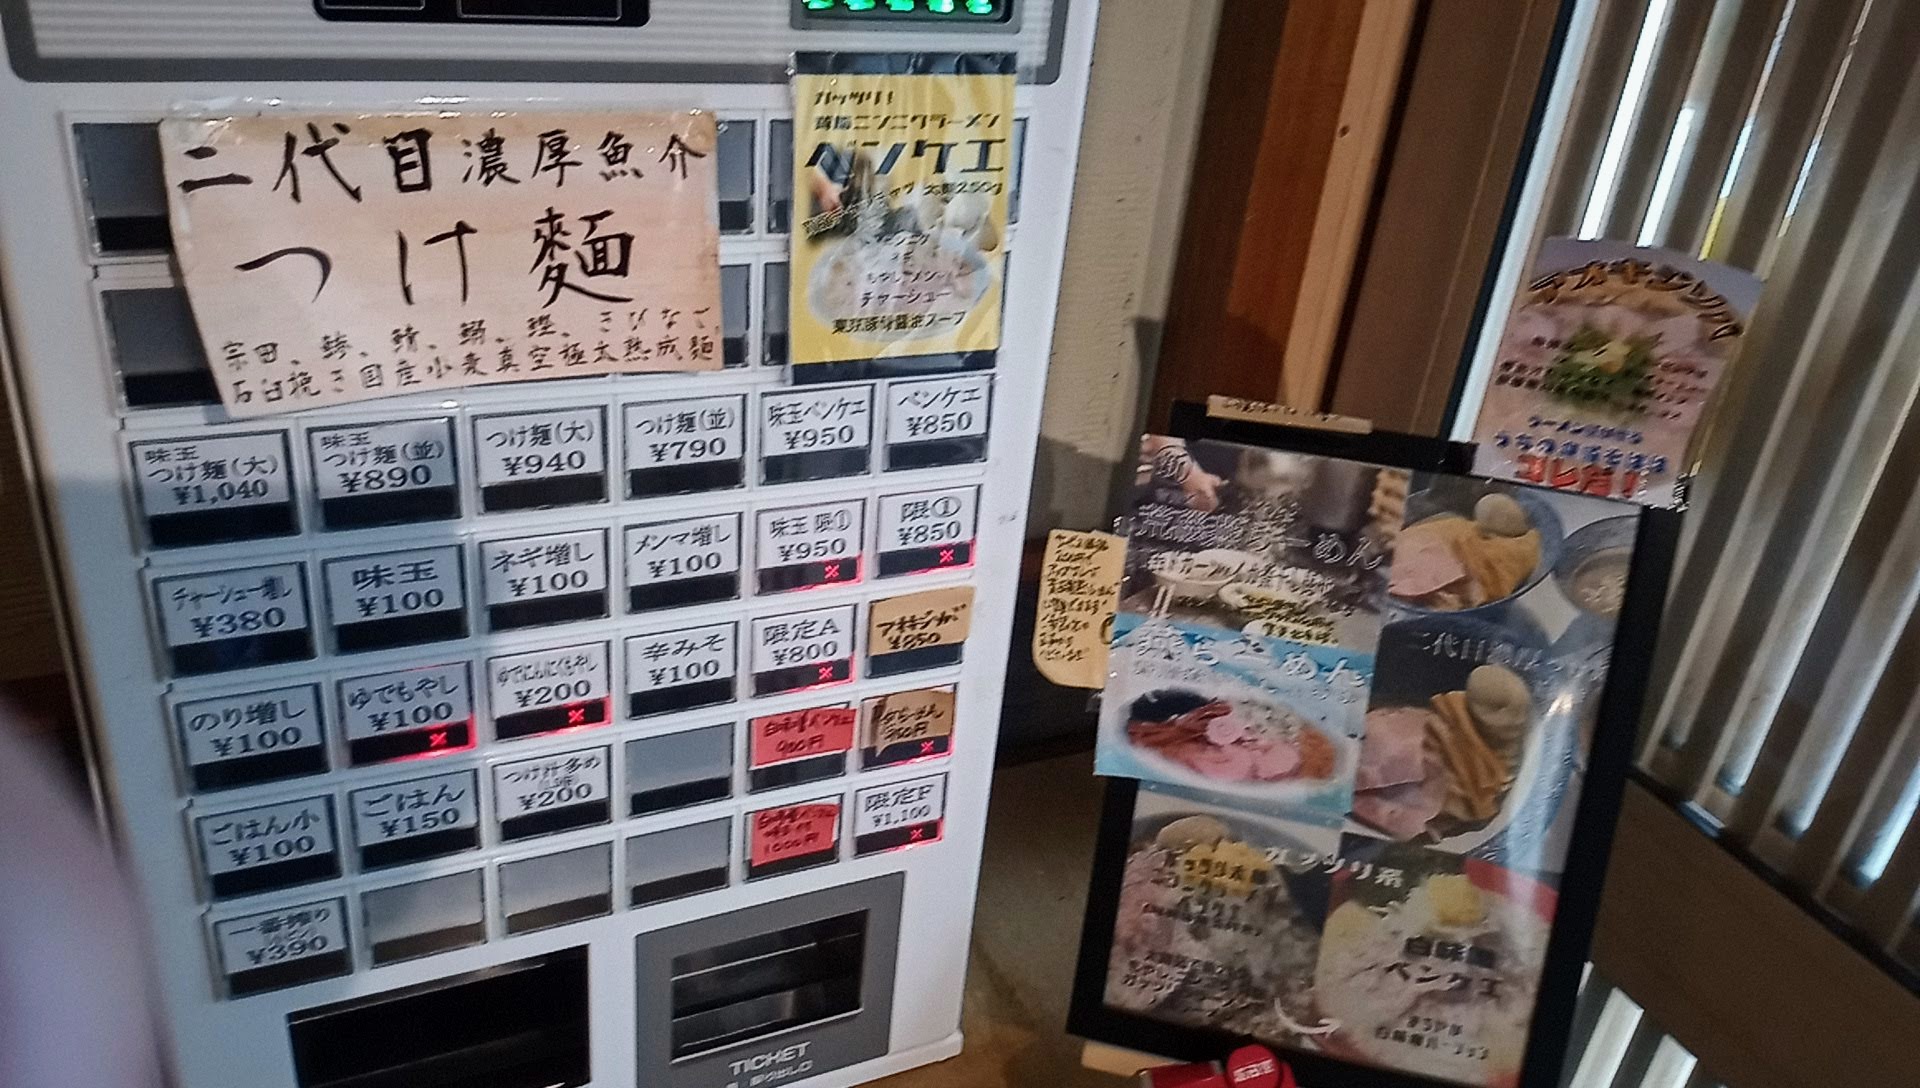 a meal ticket machine at the entrance in Aokiji